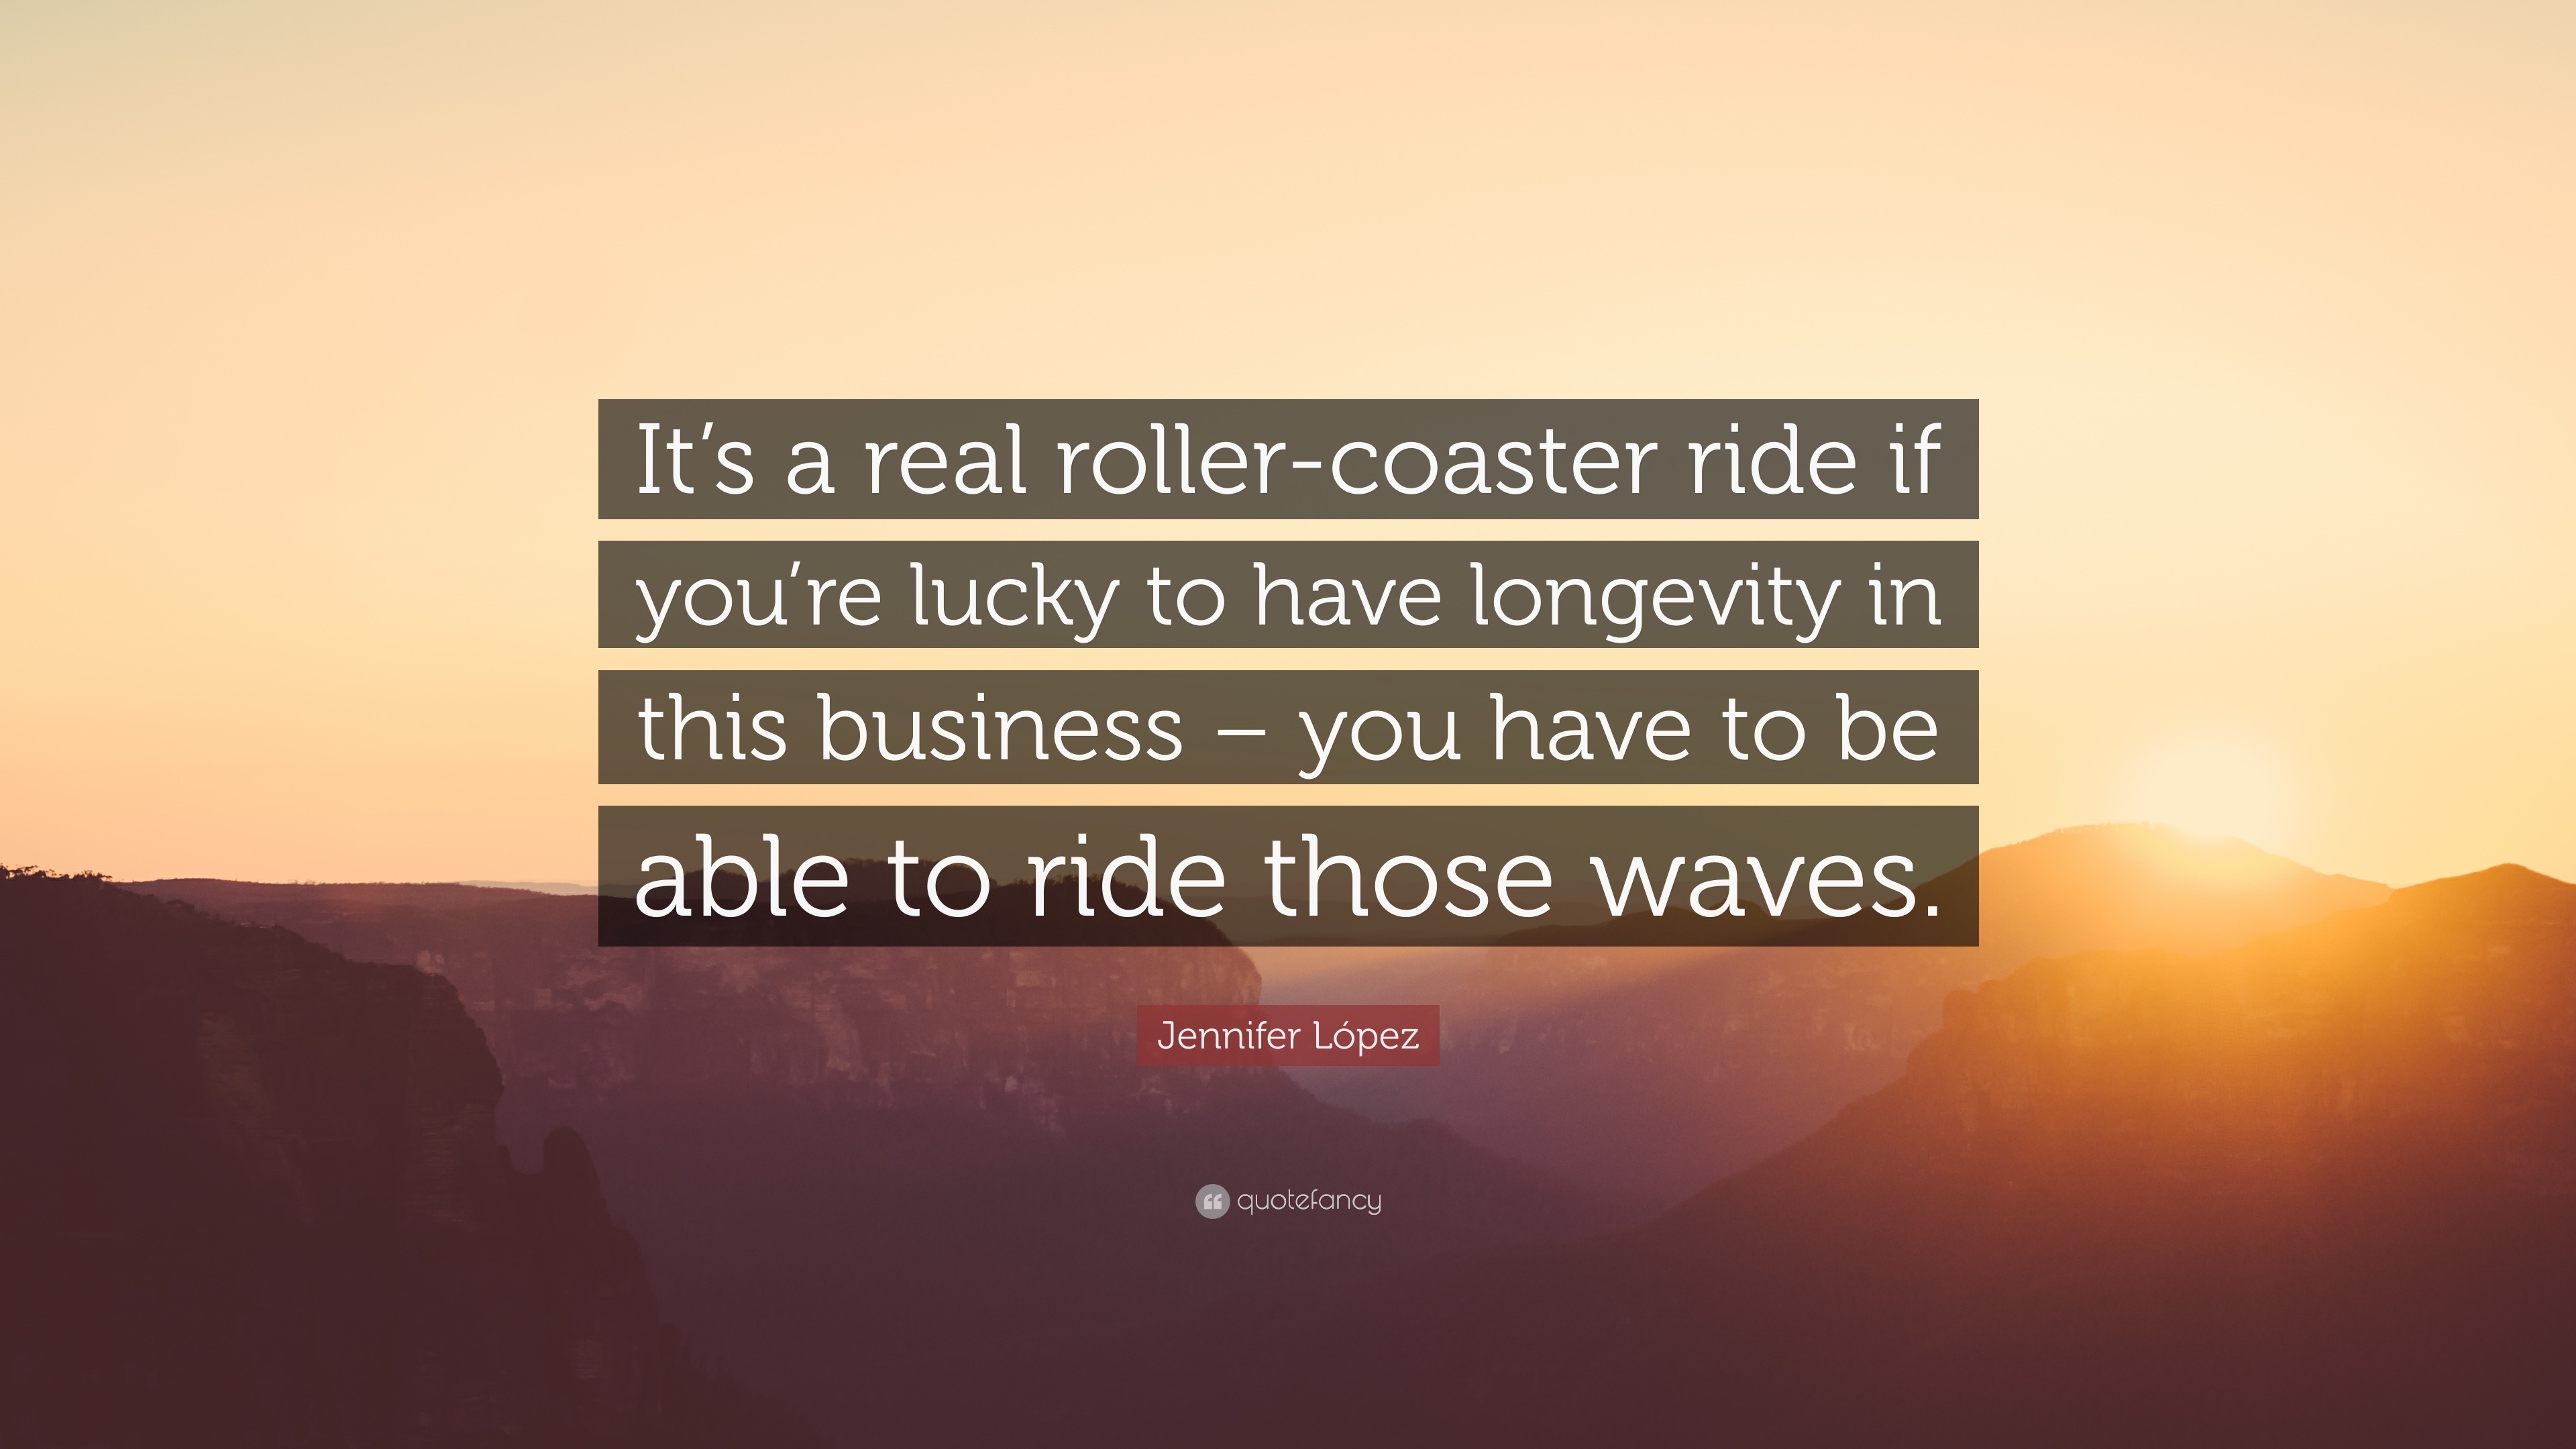 Jennifer López Quote: “It's A Real Roller-Coaster Ride If You're Lucky To Have Longevity In This Business – You Have To Be Able To Ride Those W...”